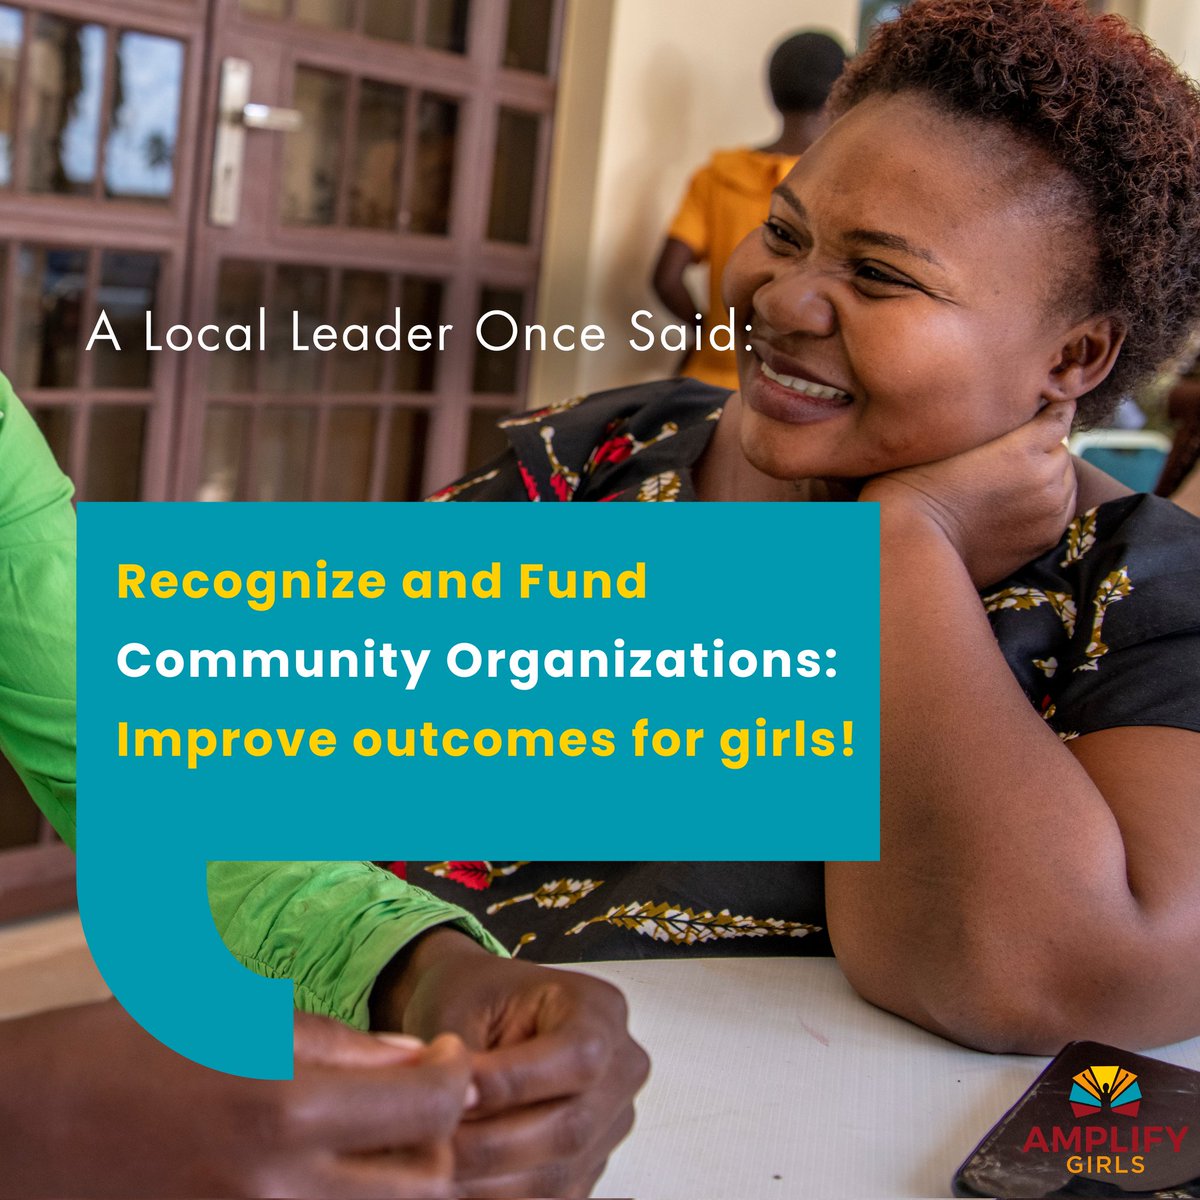 📢Community-driven organizations(CDOs) are at the front lines improving outcomes for vulnerable girls in their communities. So, why are they insufficiently funded? Community organizations want to see change. Recognize and fund CDOs now to improve outcomes for girls! #AMPLIFYHer